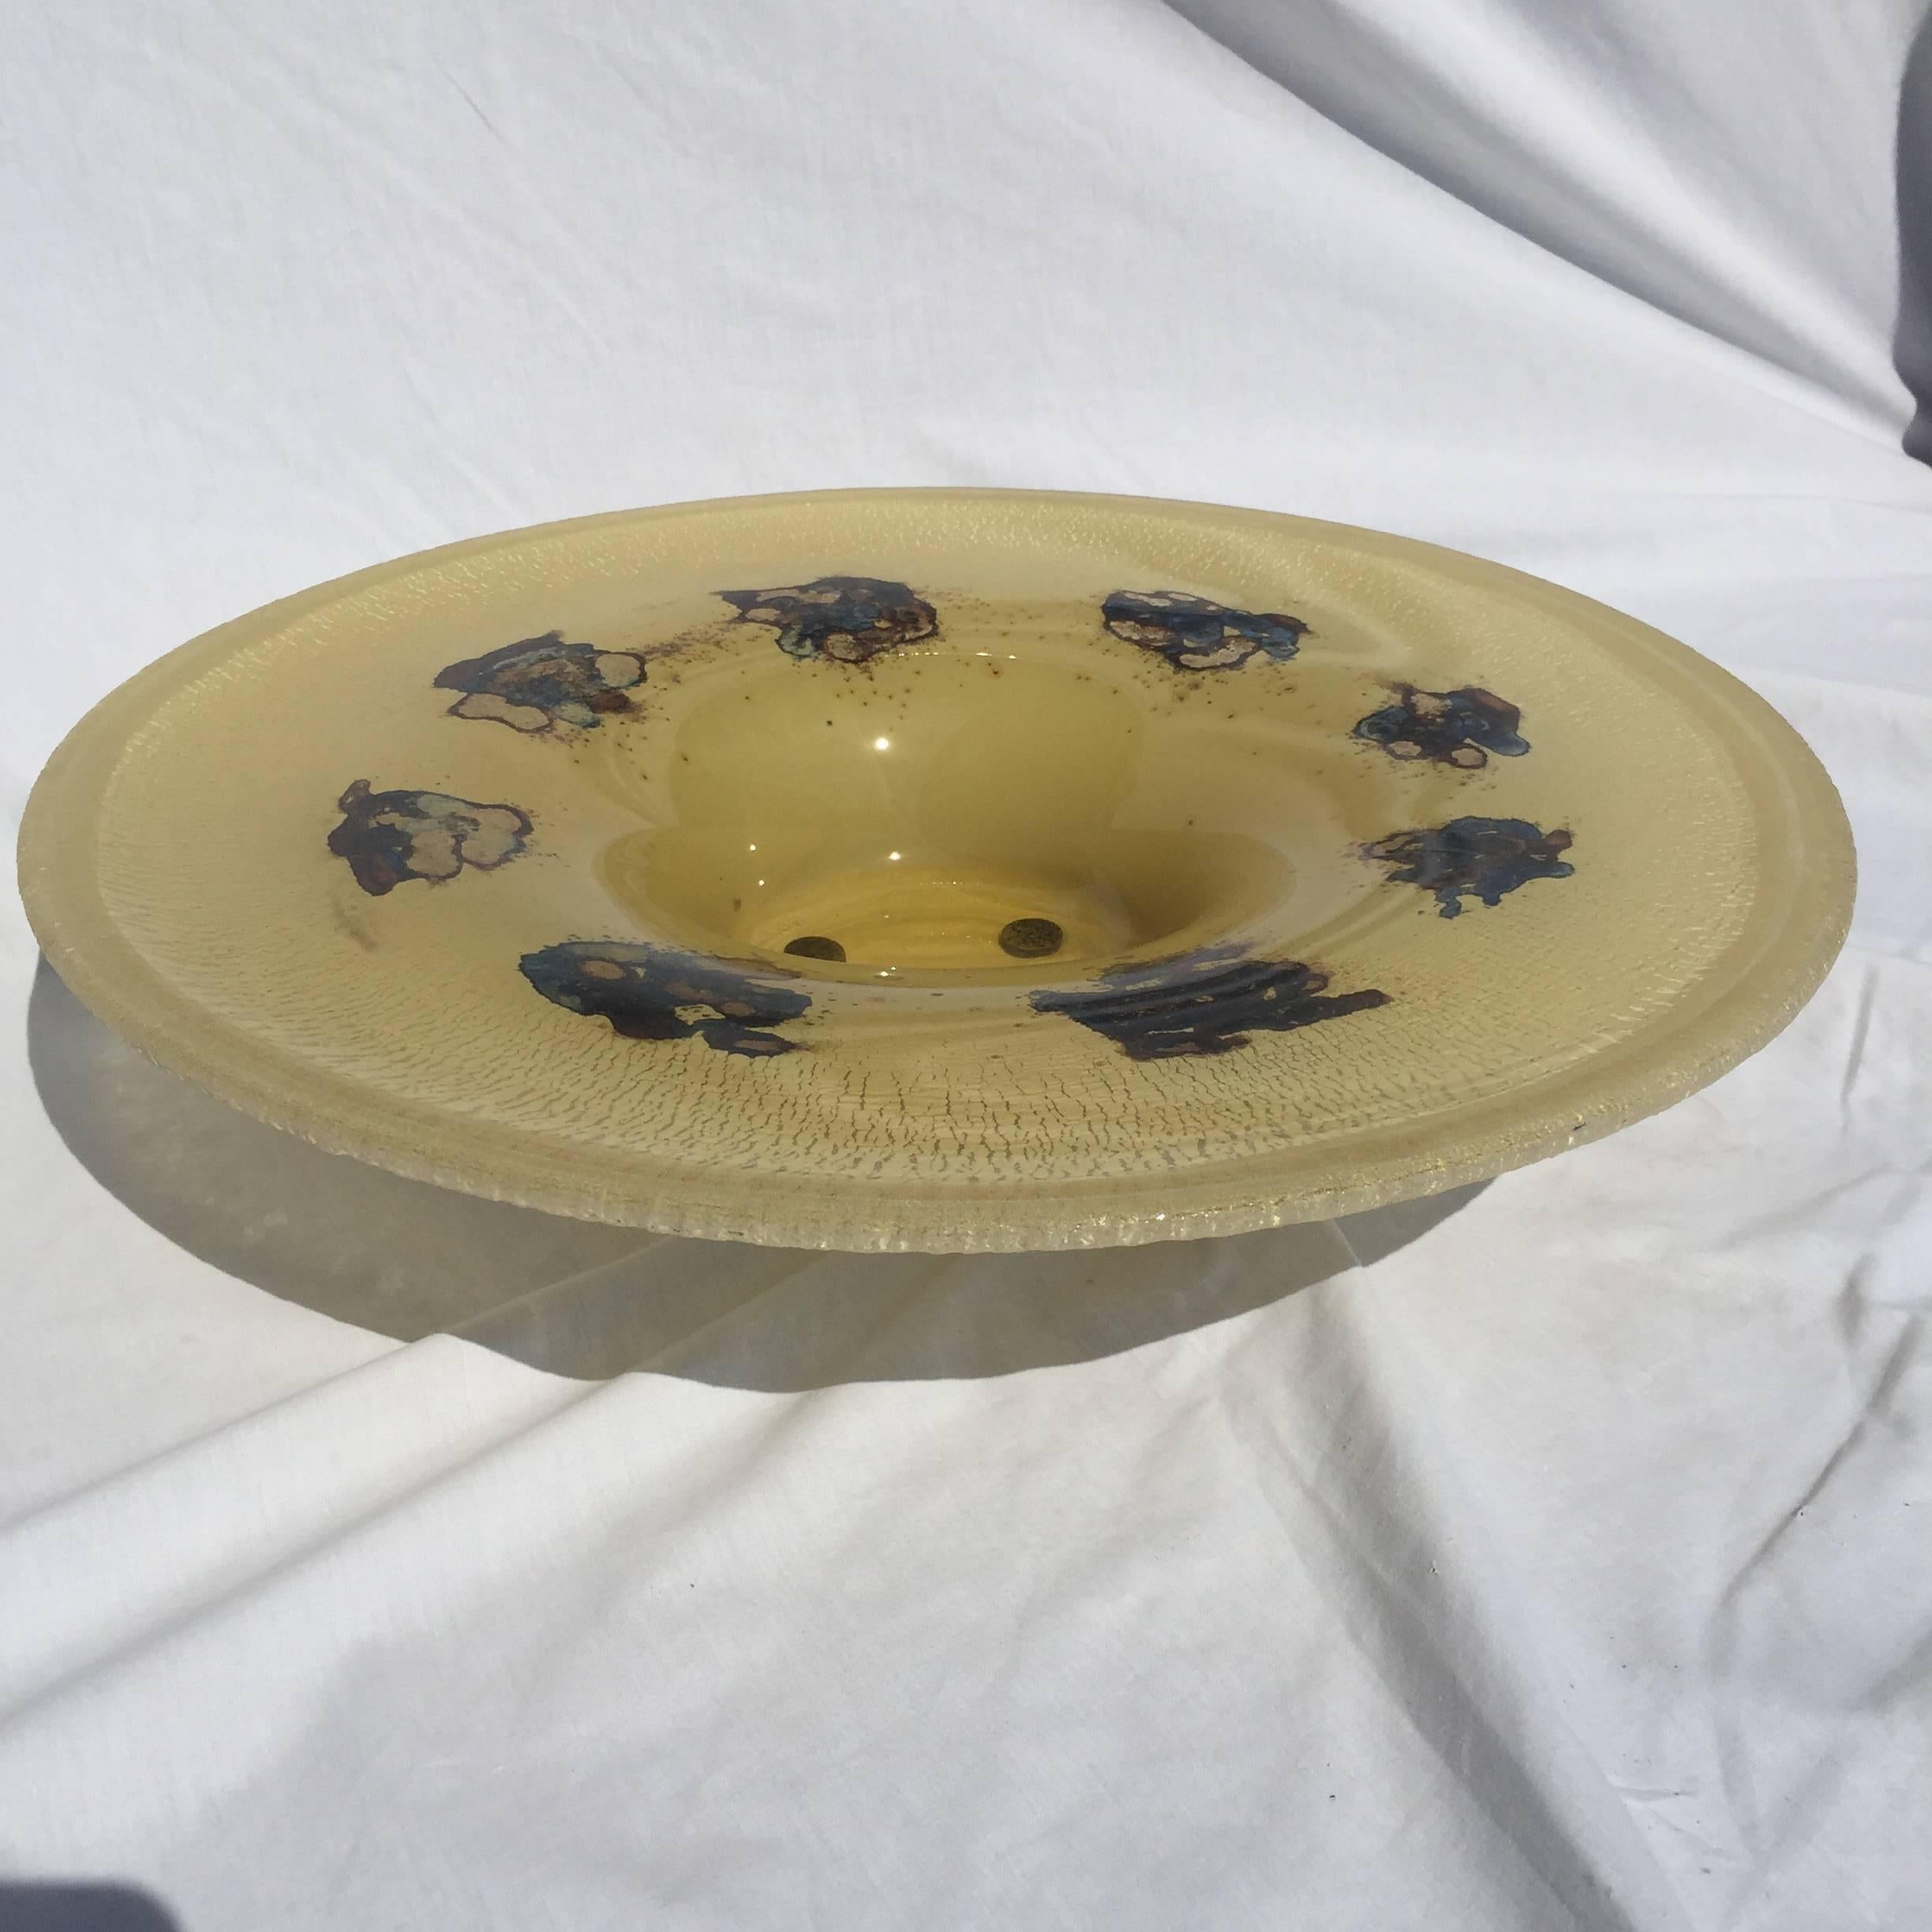 A wonderfully large Murano glass bowl using the Scavo technique signed Barbini Murano. The wide flange (about 7.25 inches) is decorated with a recognizable design in chocolate brown and electric blue. The rim and underside exhibit the Scavo